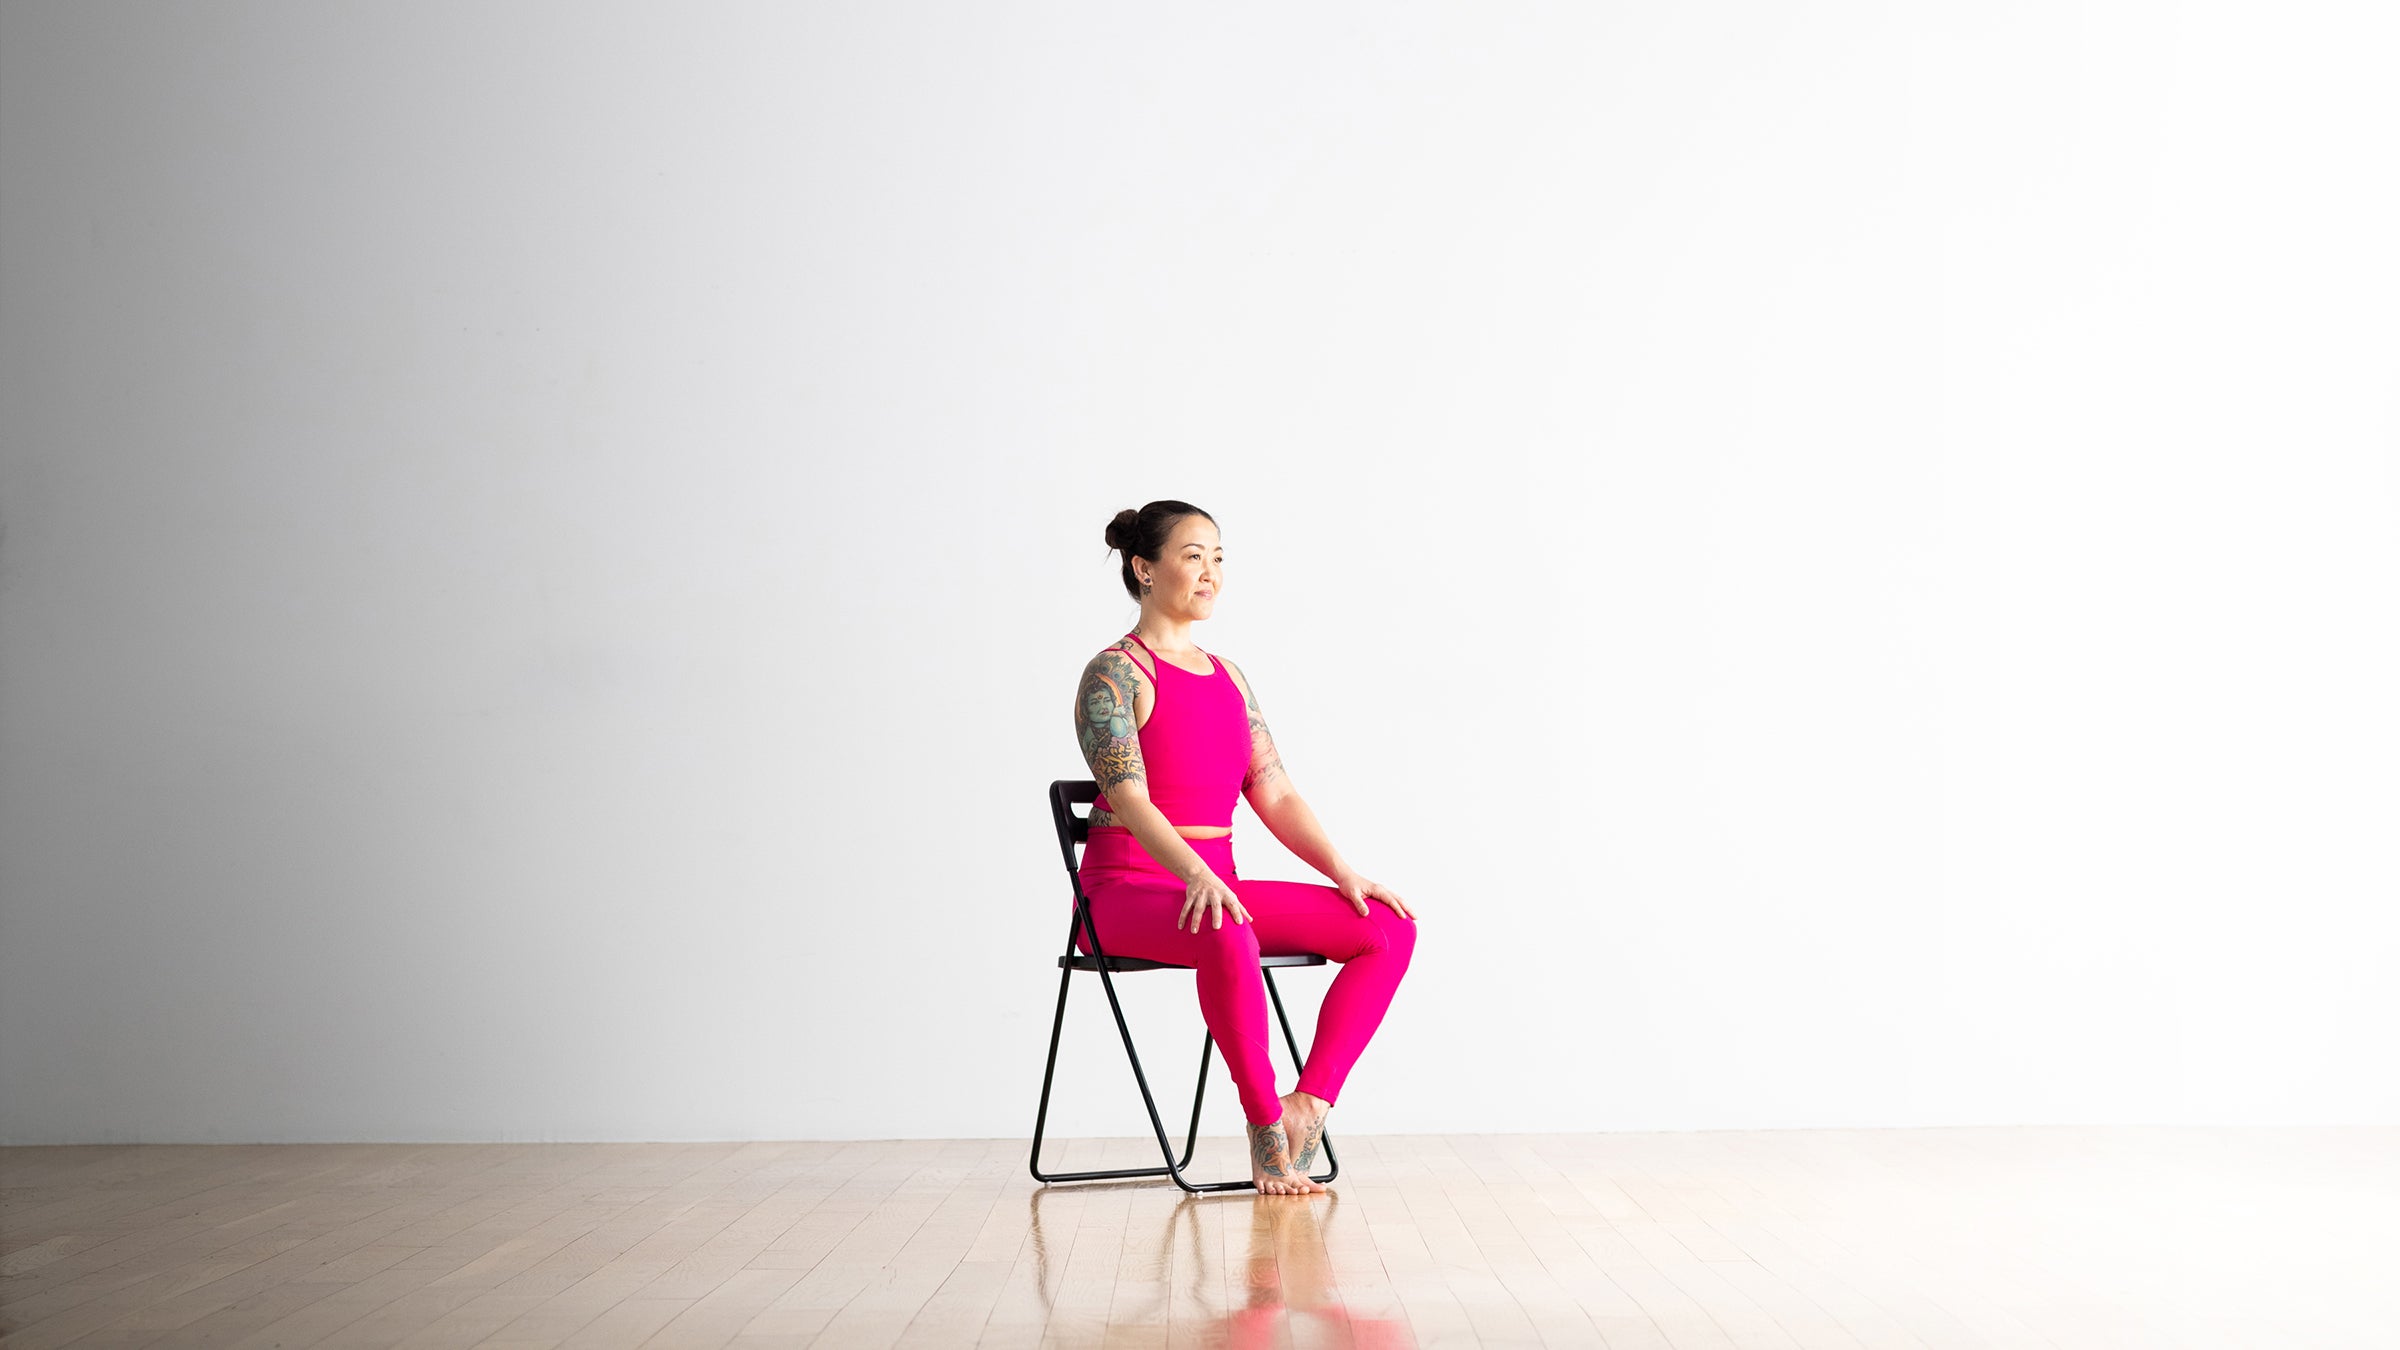 Build Strength and Length in Chair Pose (Utkatasana)